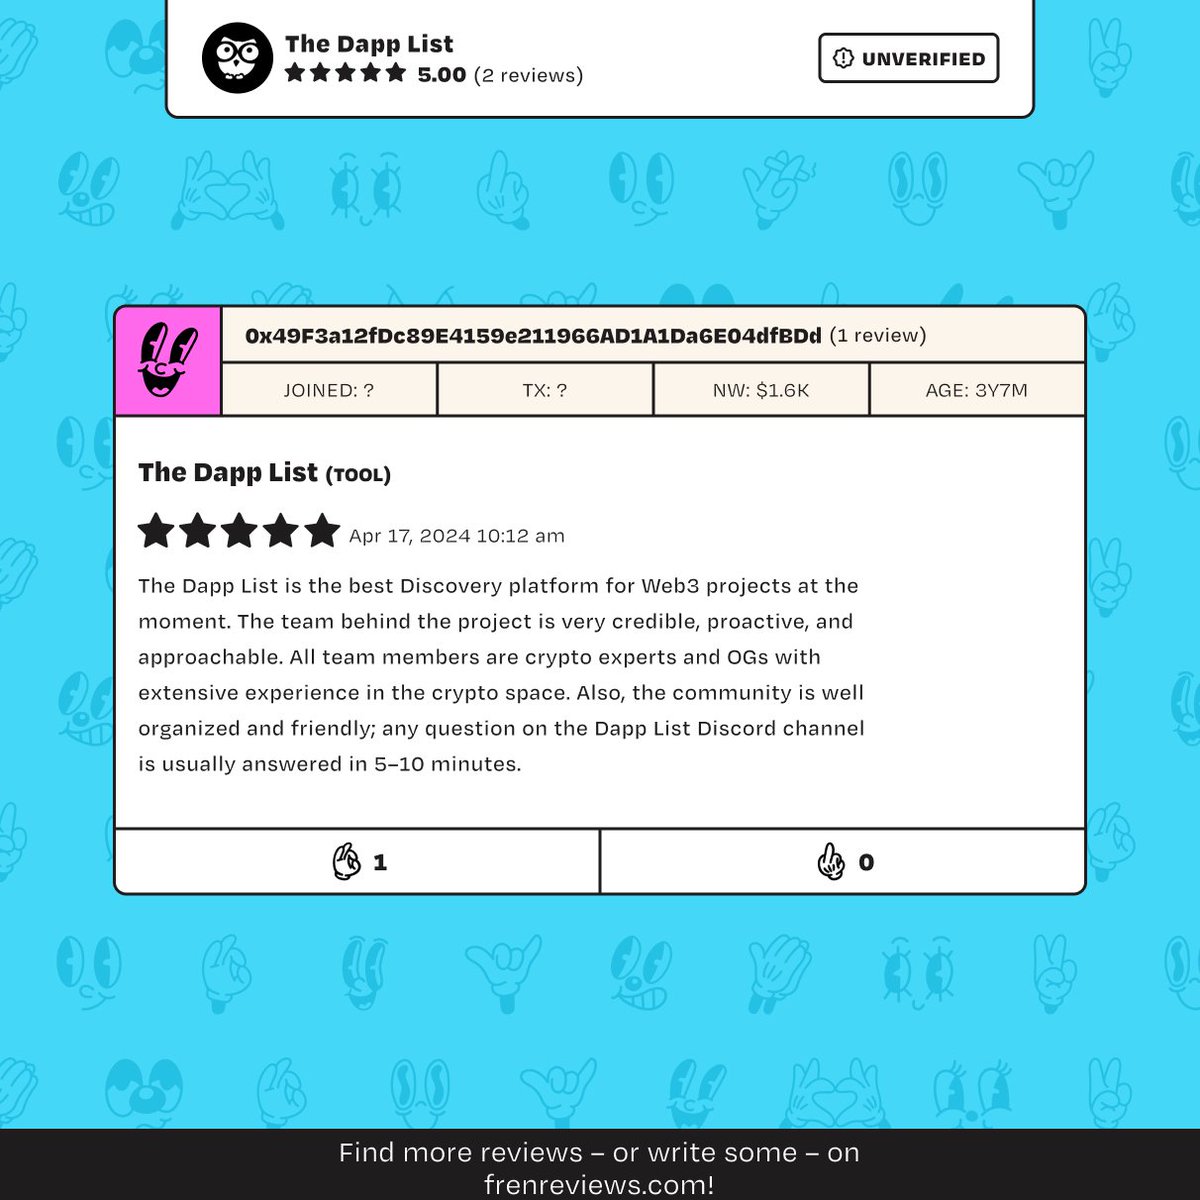 Here's a review for @thedapplist that's bursting with glowing feedback! ✨ when it comes to knowing your crypto, nothing beats joining a community like this. Instant feedback and a powerhouse team to back you up! Ain't that the dream?